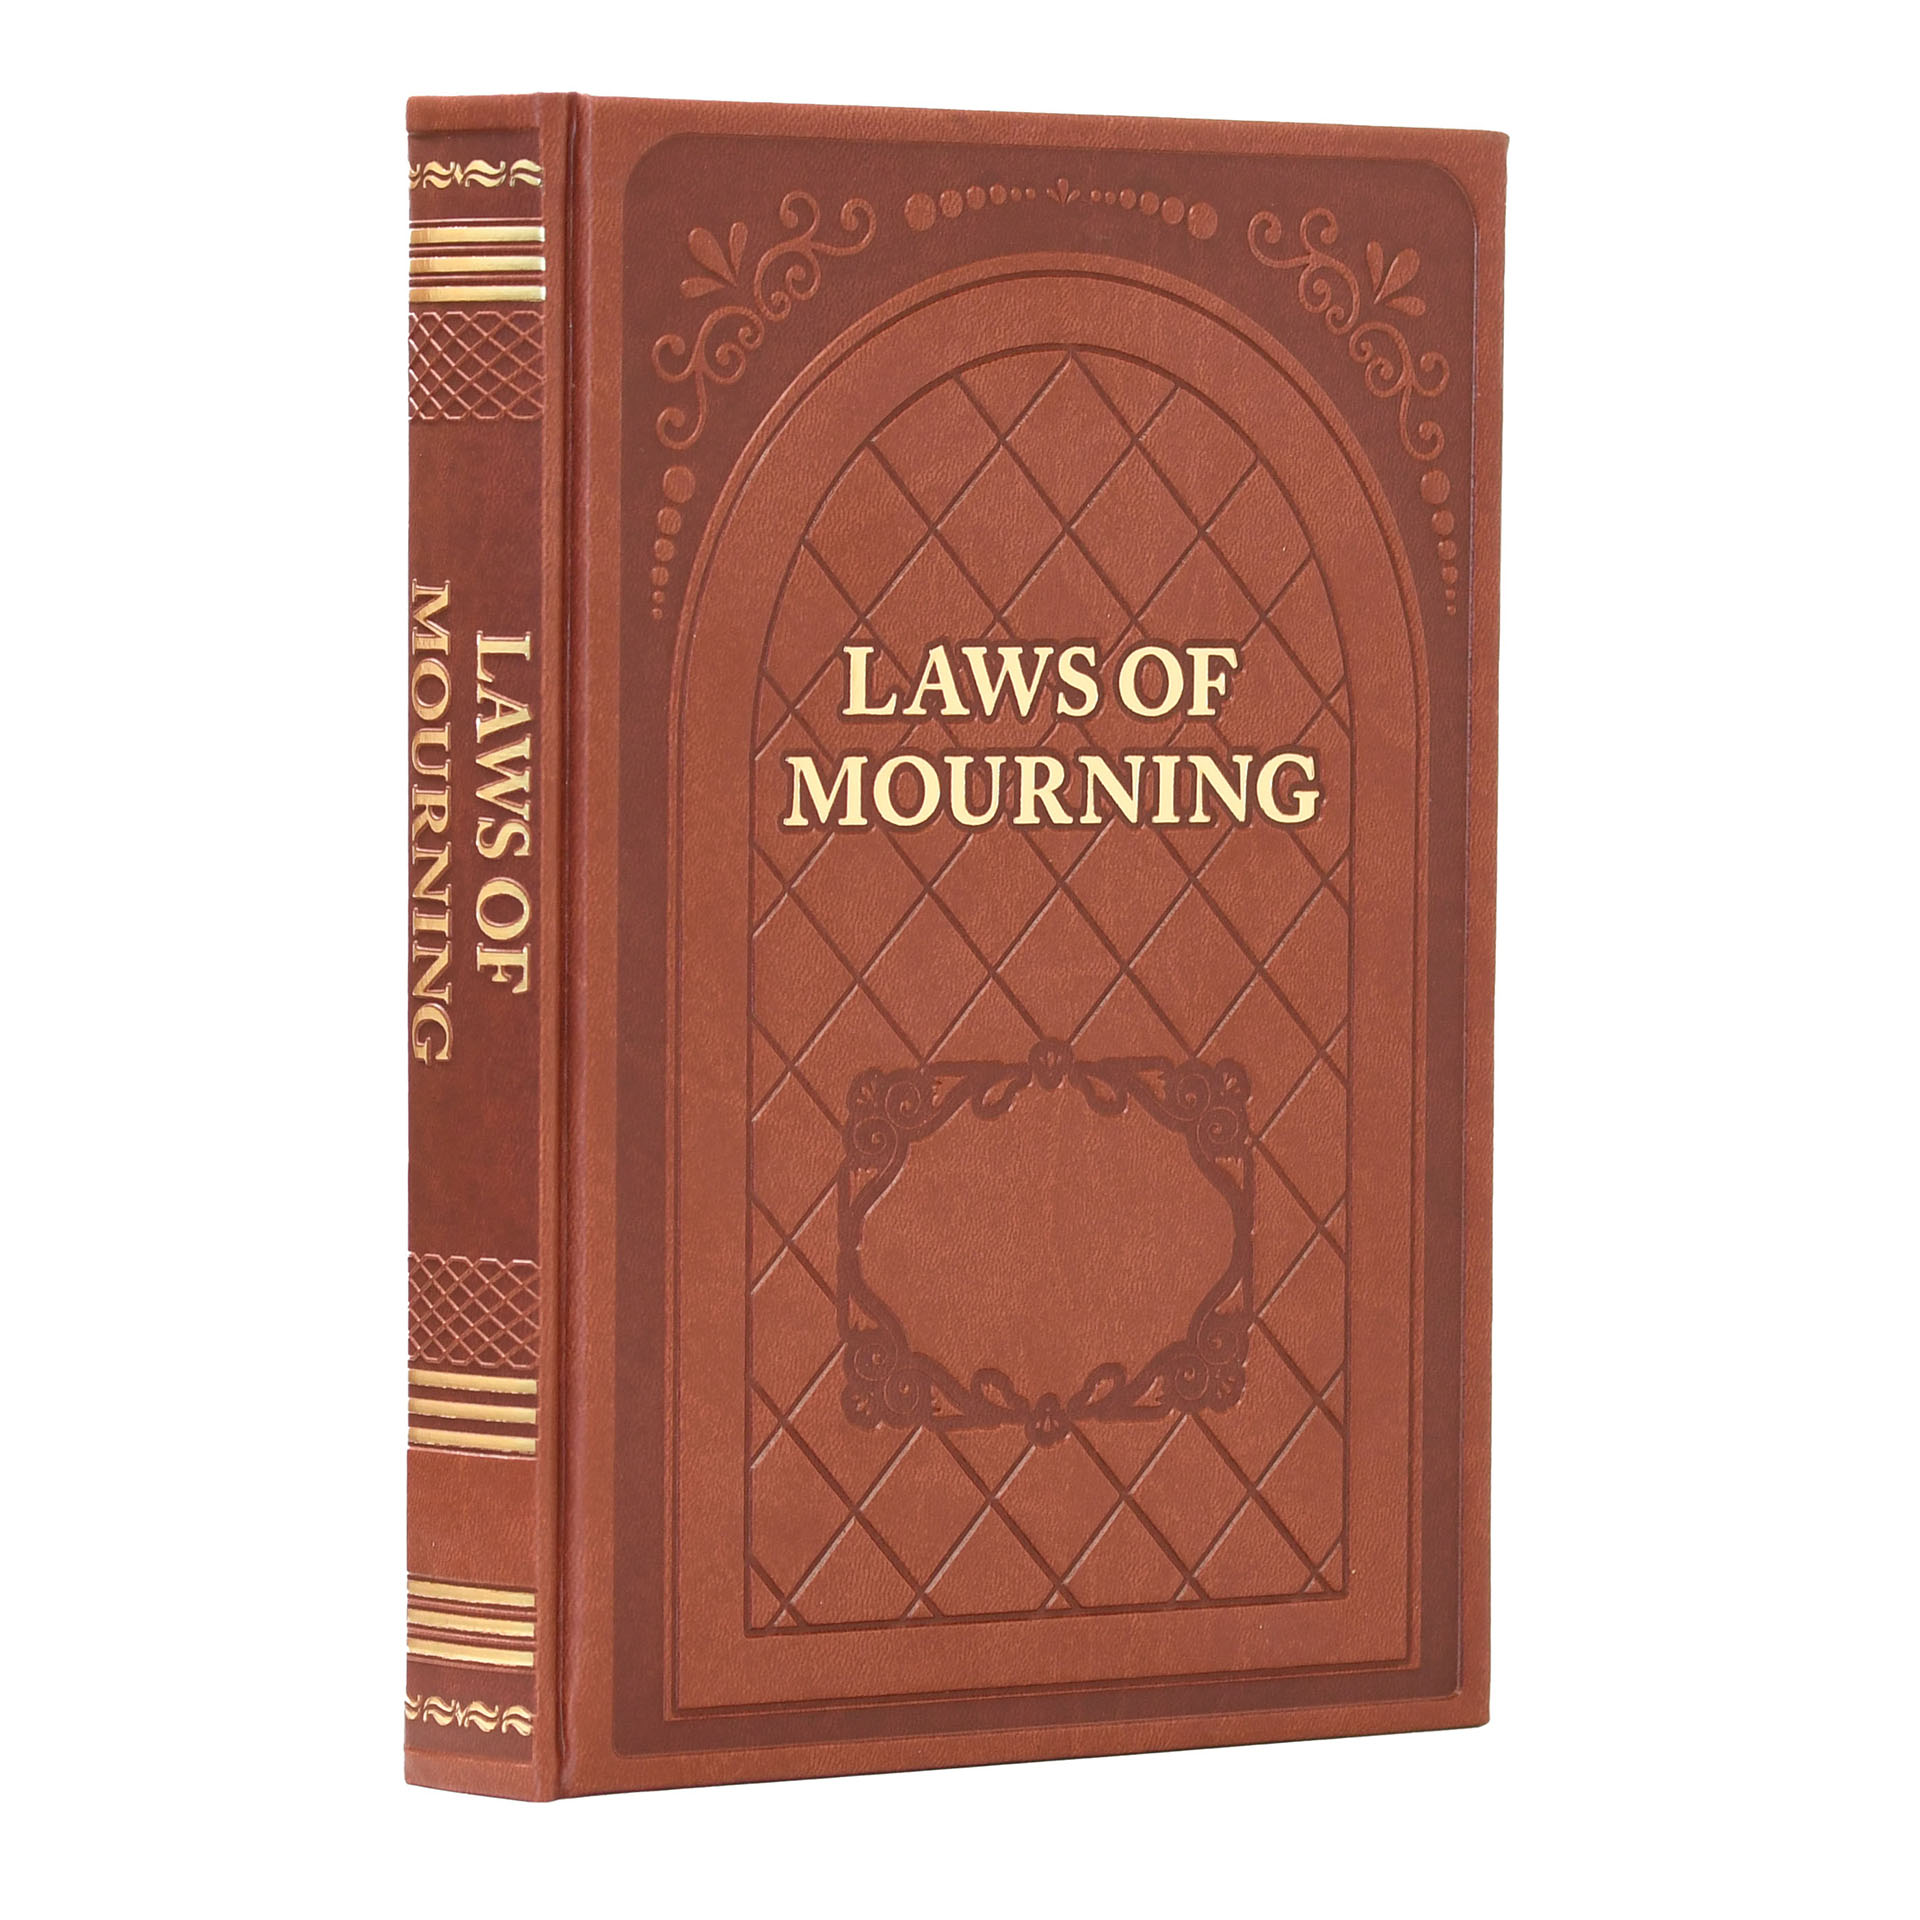 LAWS OF MOURNING